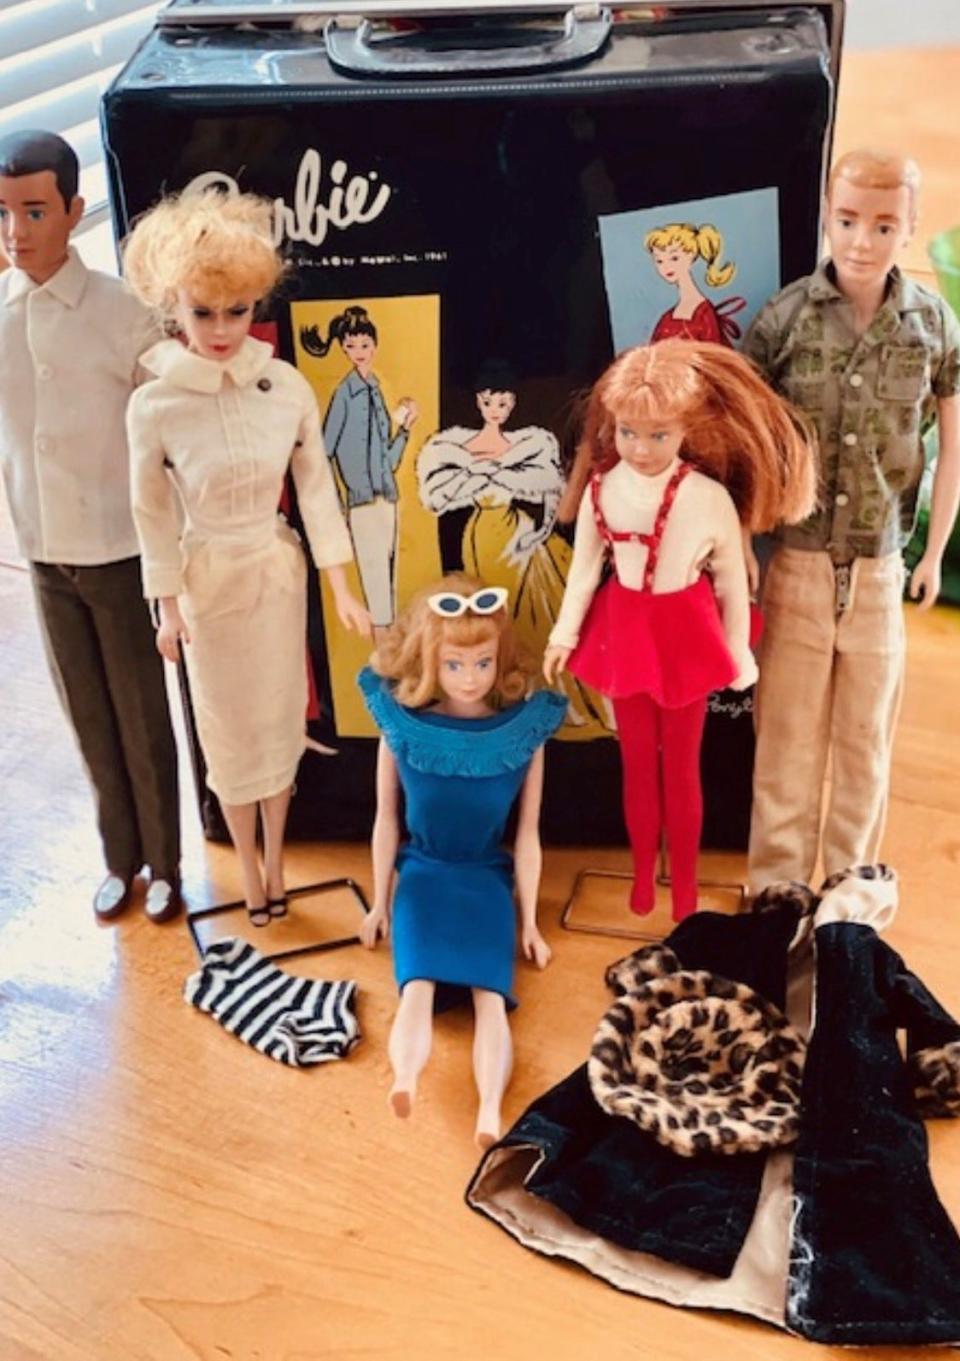 Tallahassee Table's Rochelle Koff still cherishes her collection of Barbie dolls (and friends).